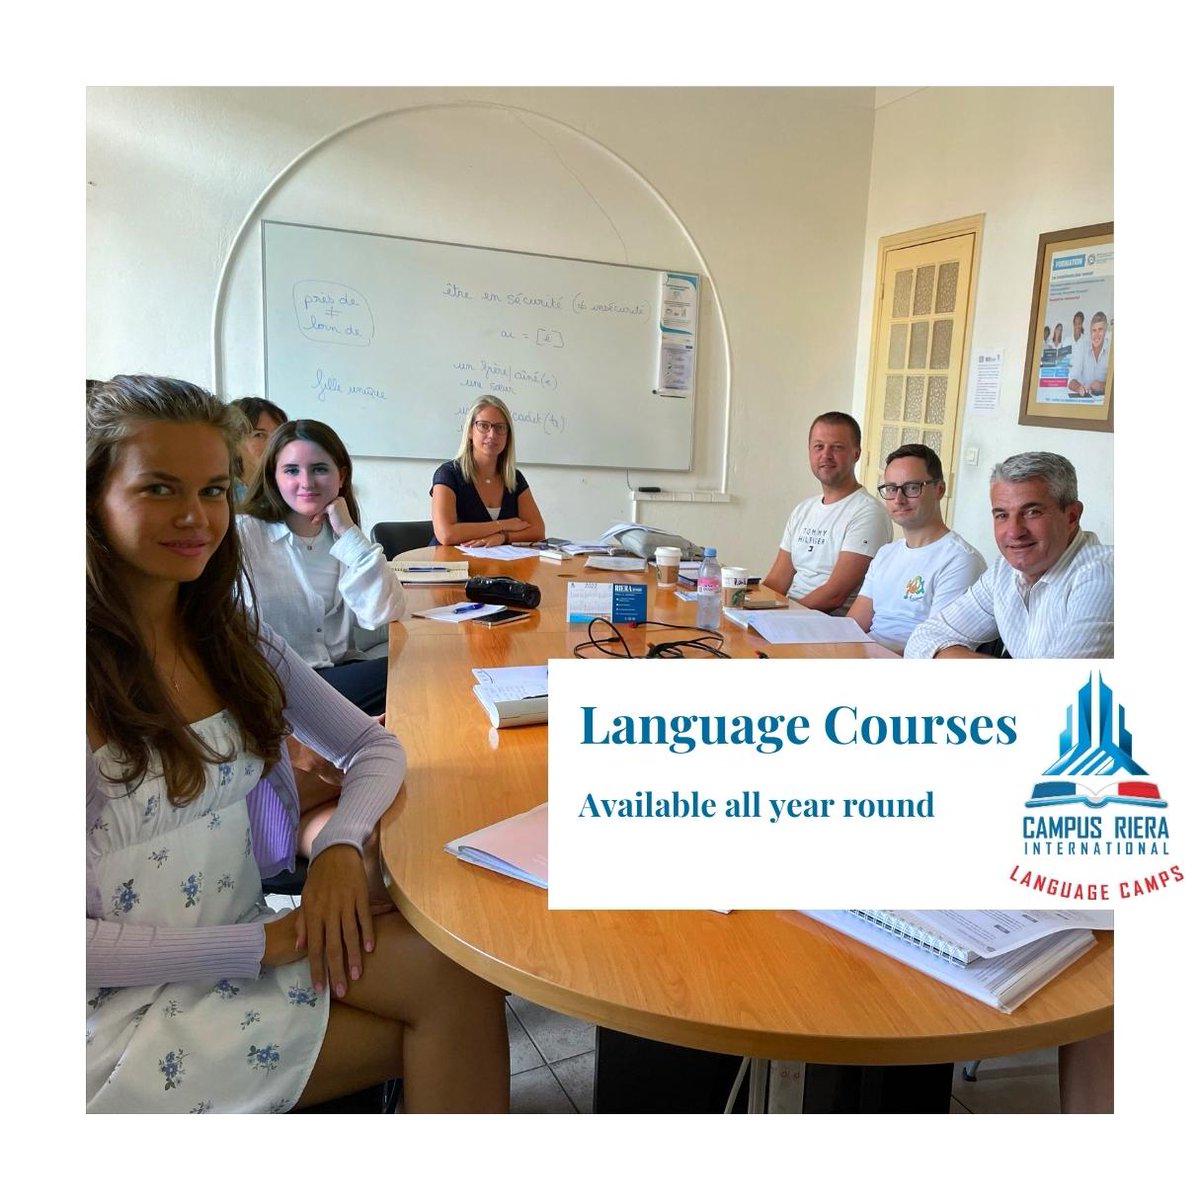 The summer is over, now September begins!
Our Language Courses are open all year yound.
Come and learn new languages in the magnificent
French Riviera.
More information available at cir@cir.tf
or at +33 4 92 99 26 63
#cannes #languagecourses 
#frenchriviera #CôtedAzur #CIR